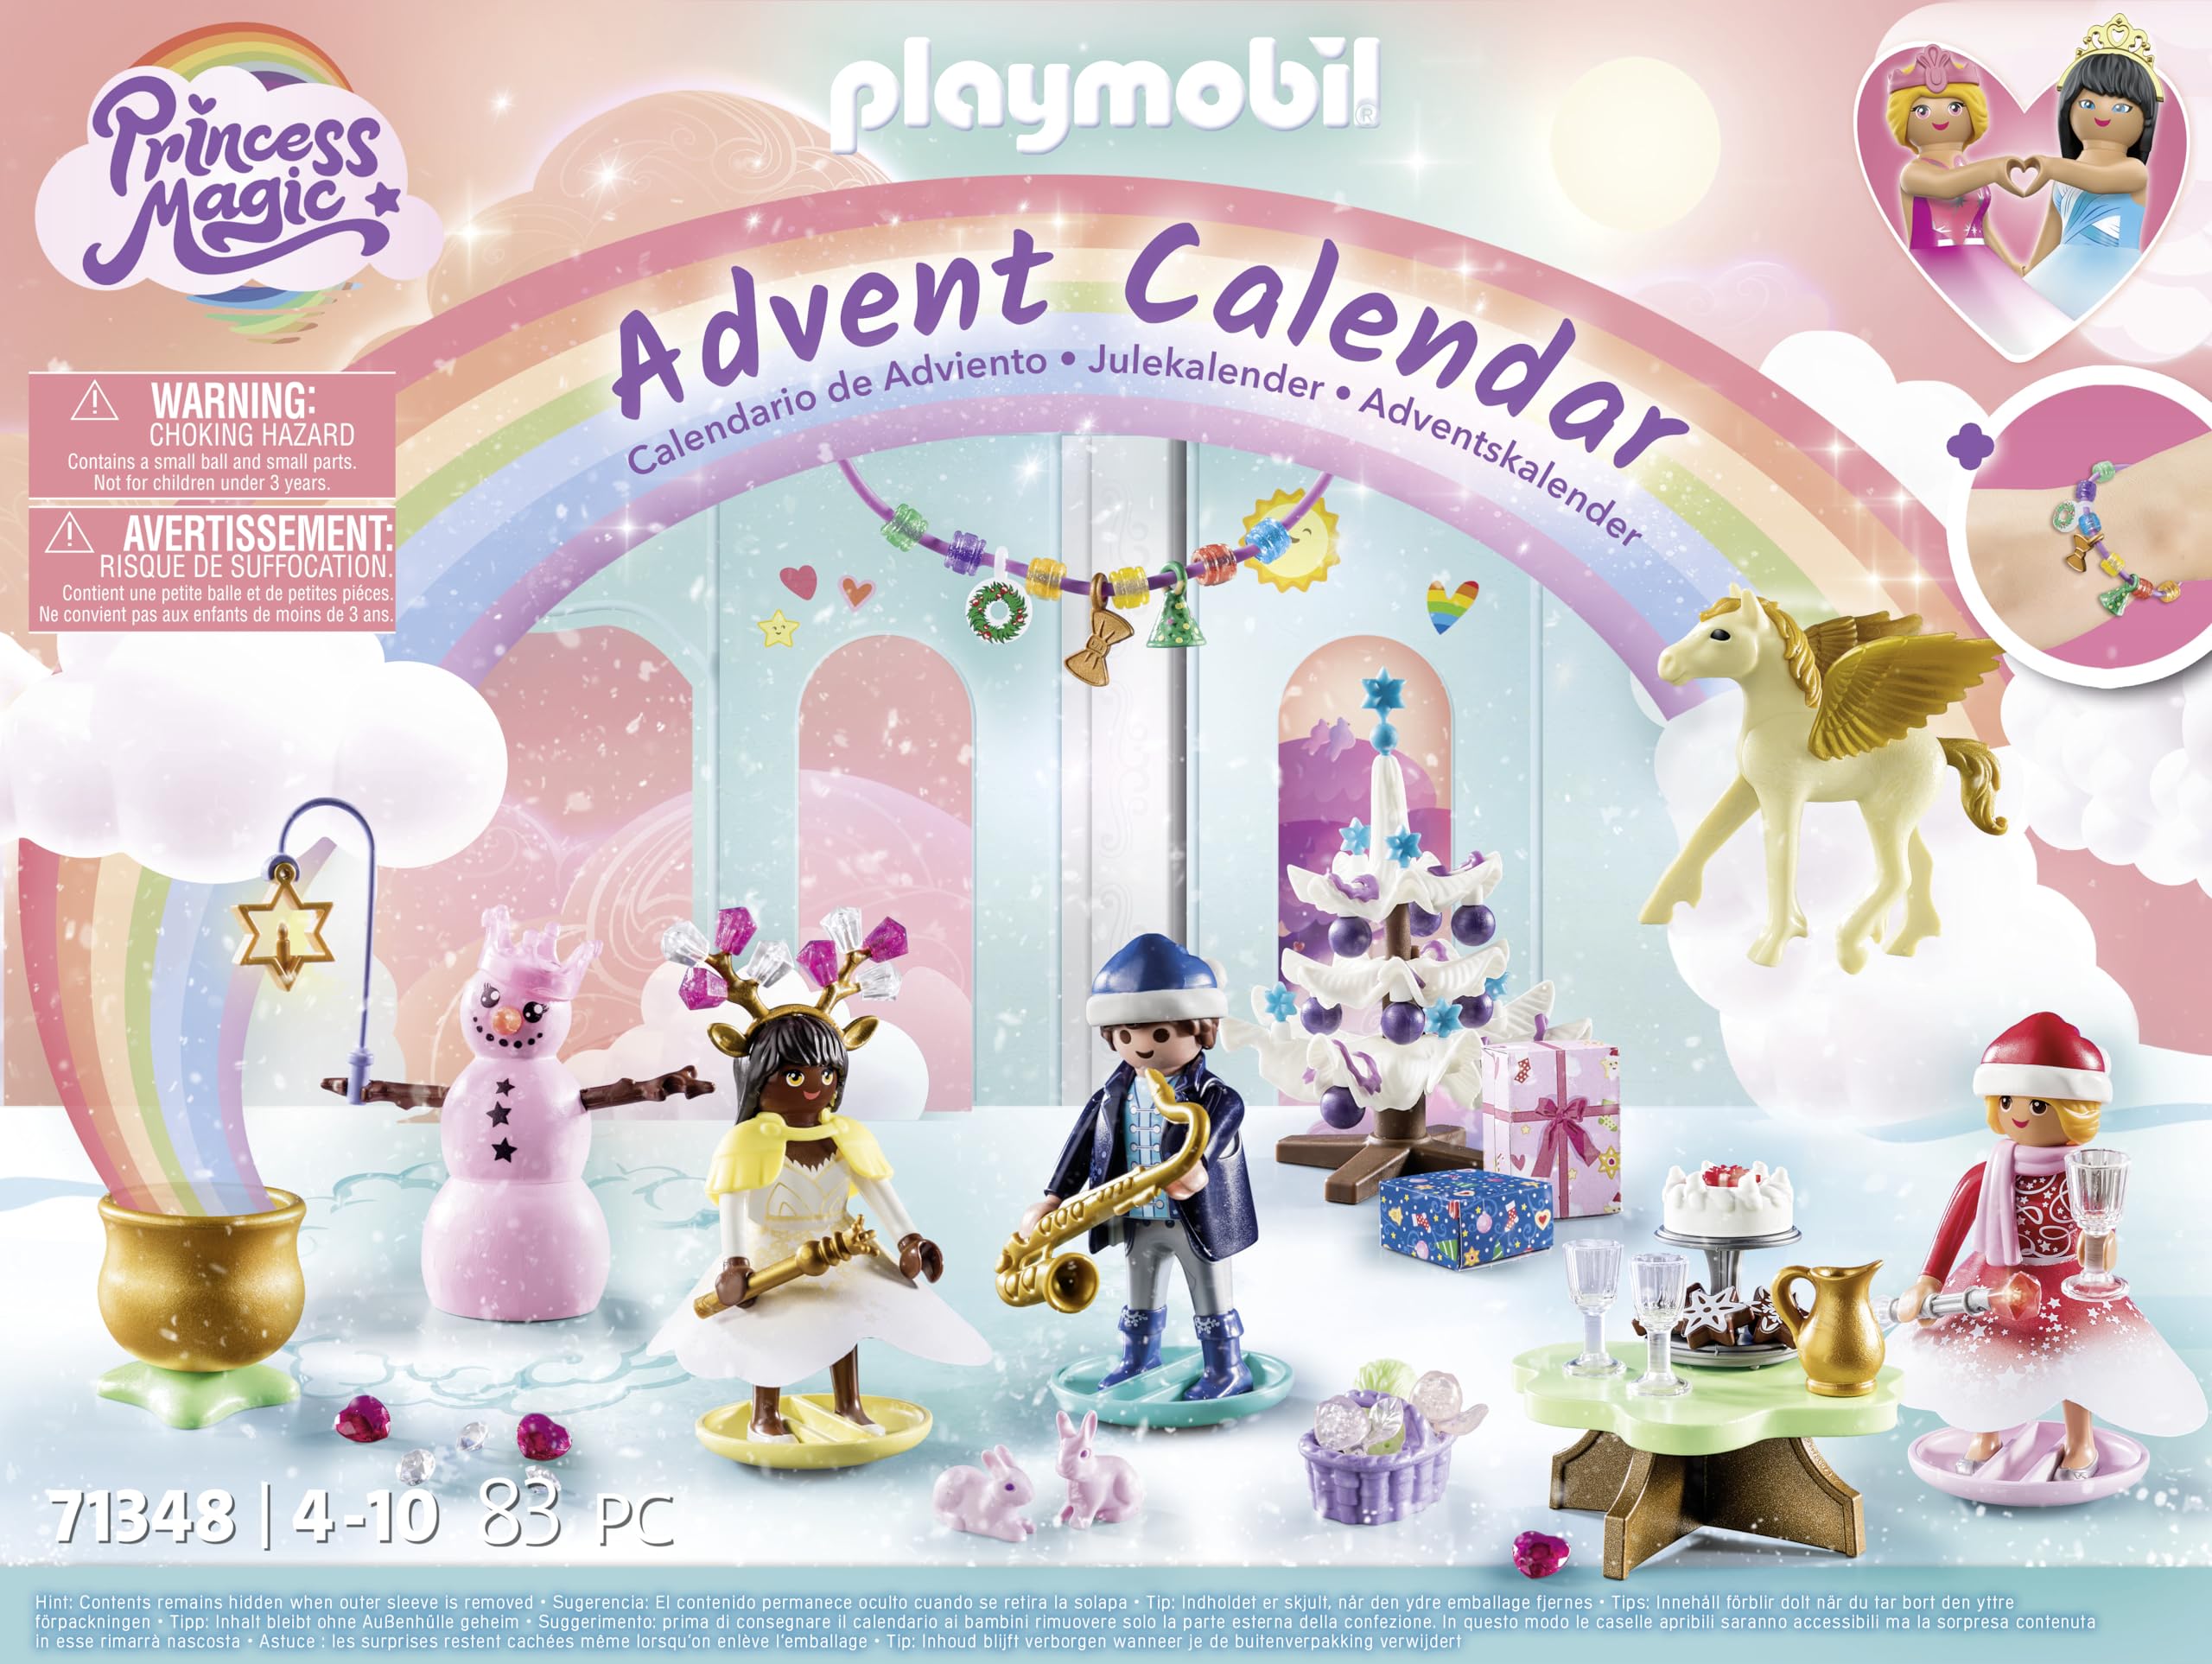 83-Piece Playmobil 2023 Christmas Advent Calendar $22.49 + Free Shipping w/ Prime or on $35+